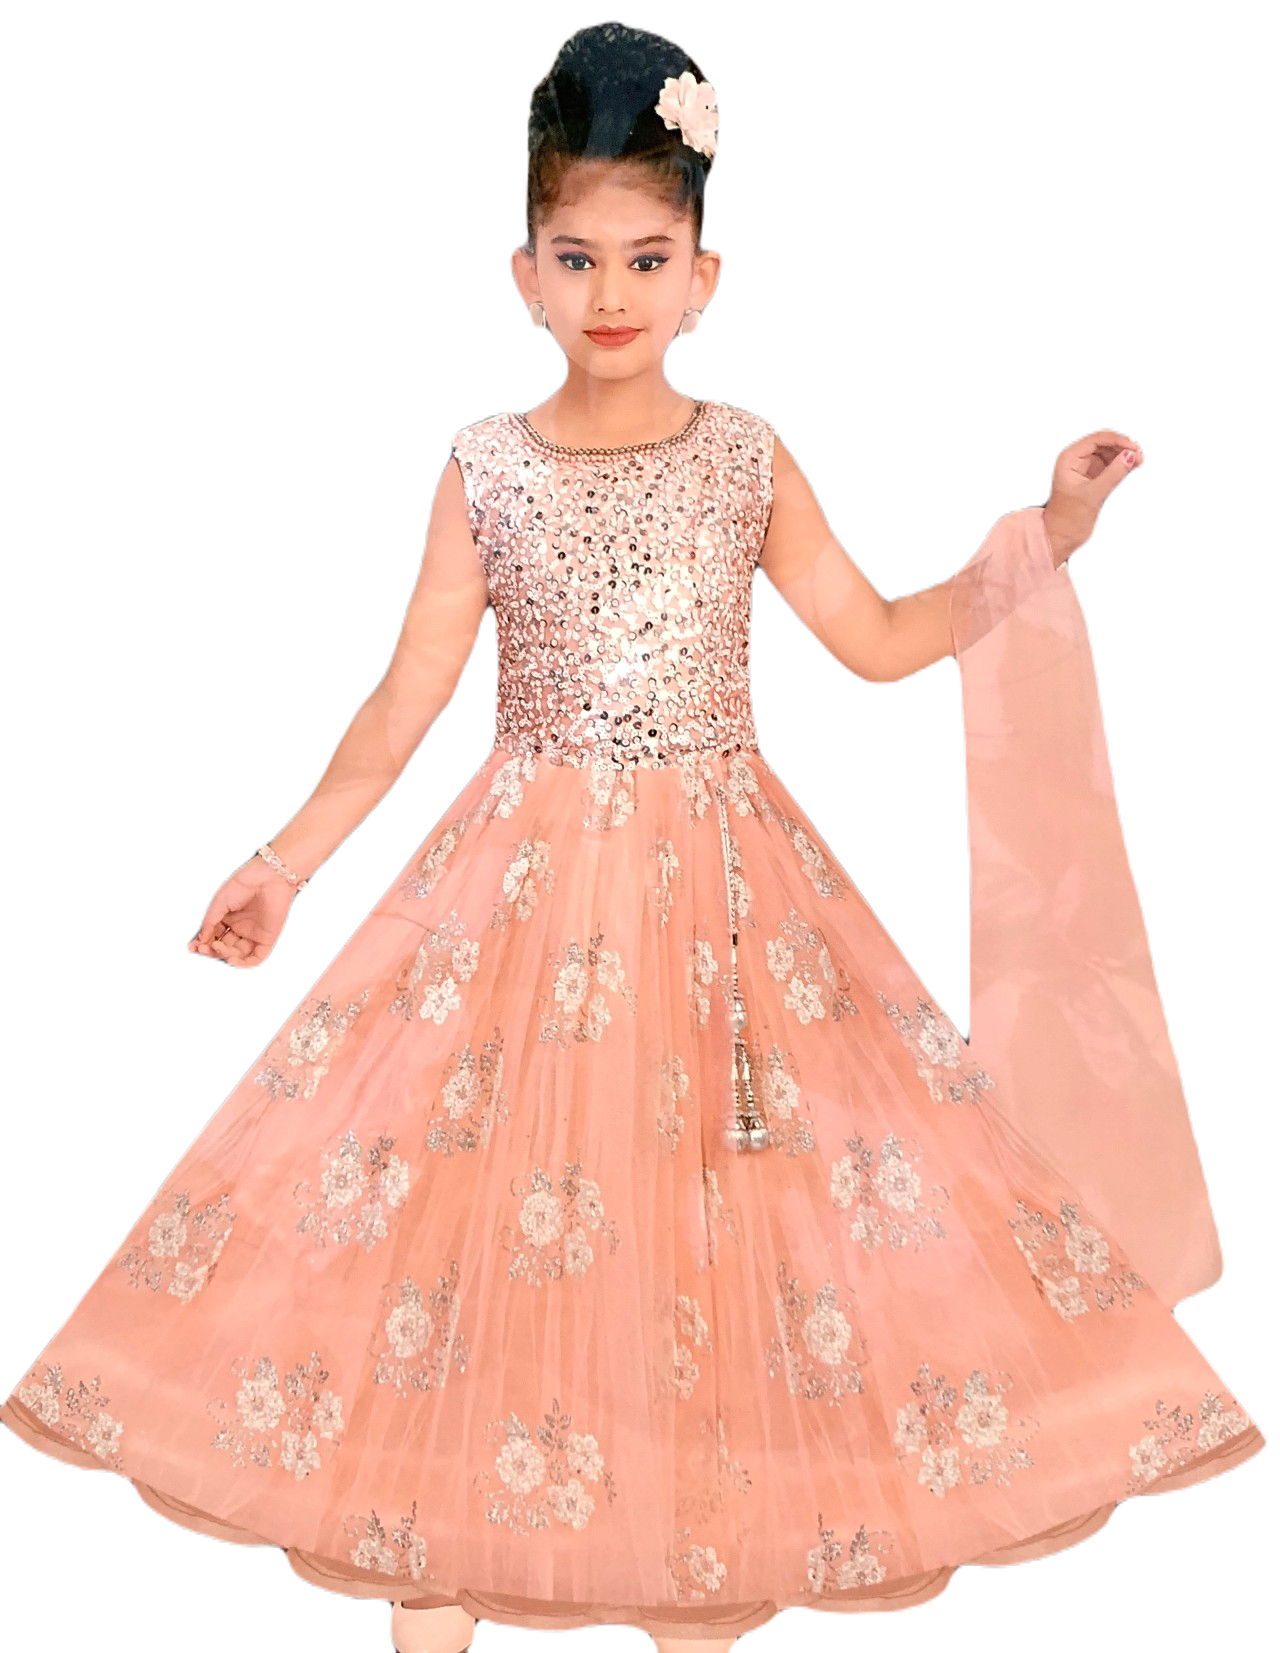 Get the Latest Gowns for Girls | Manualidades